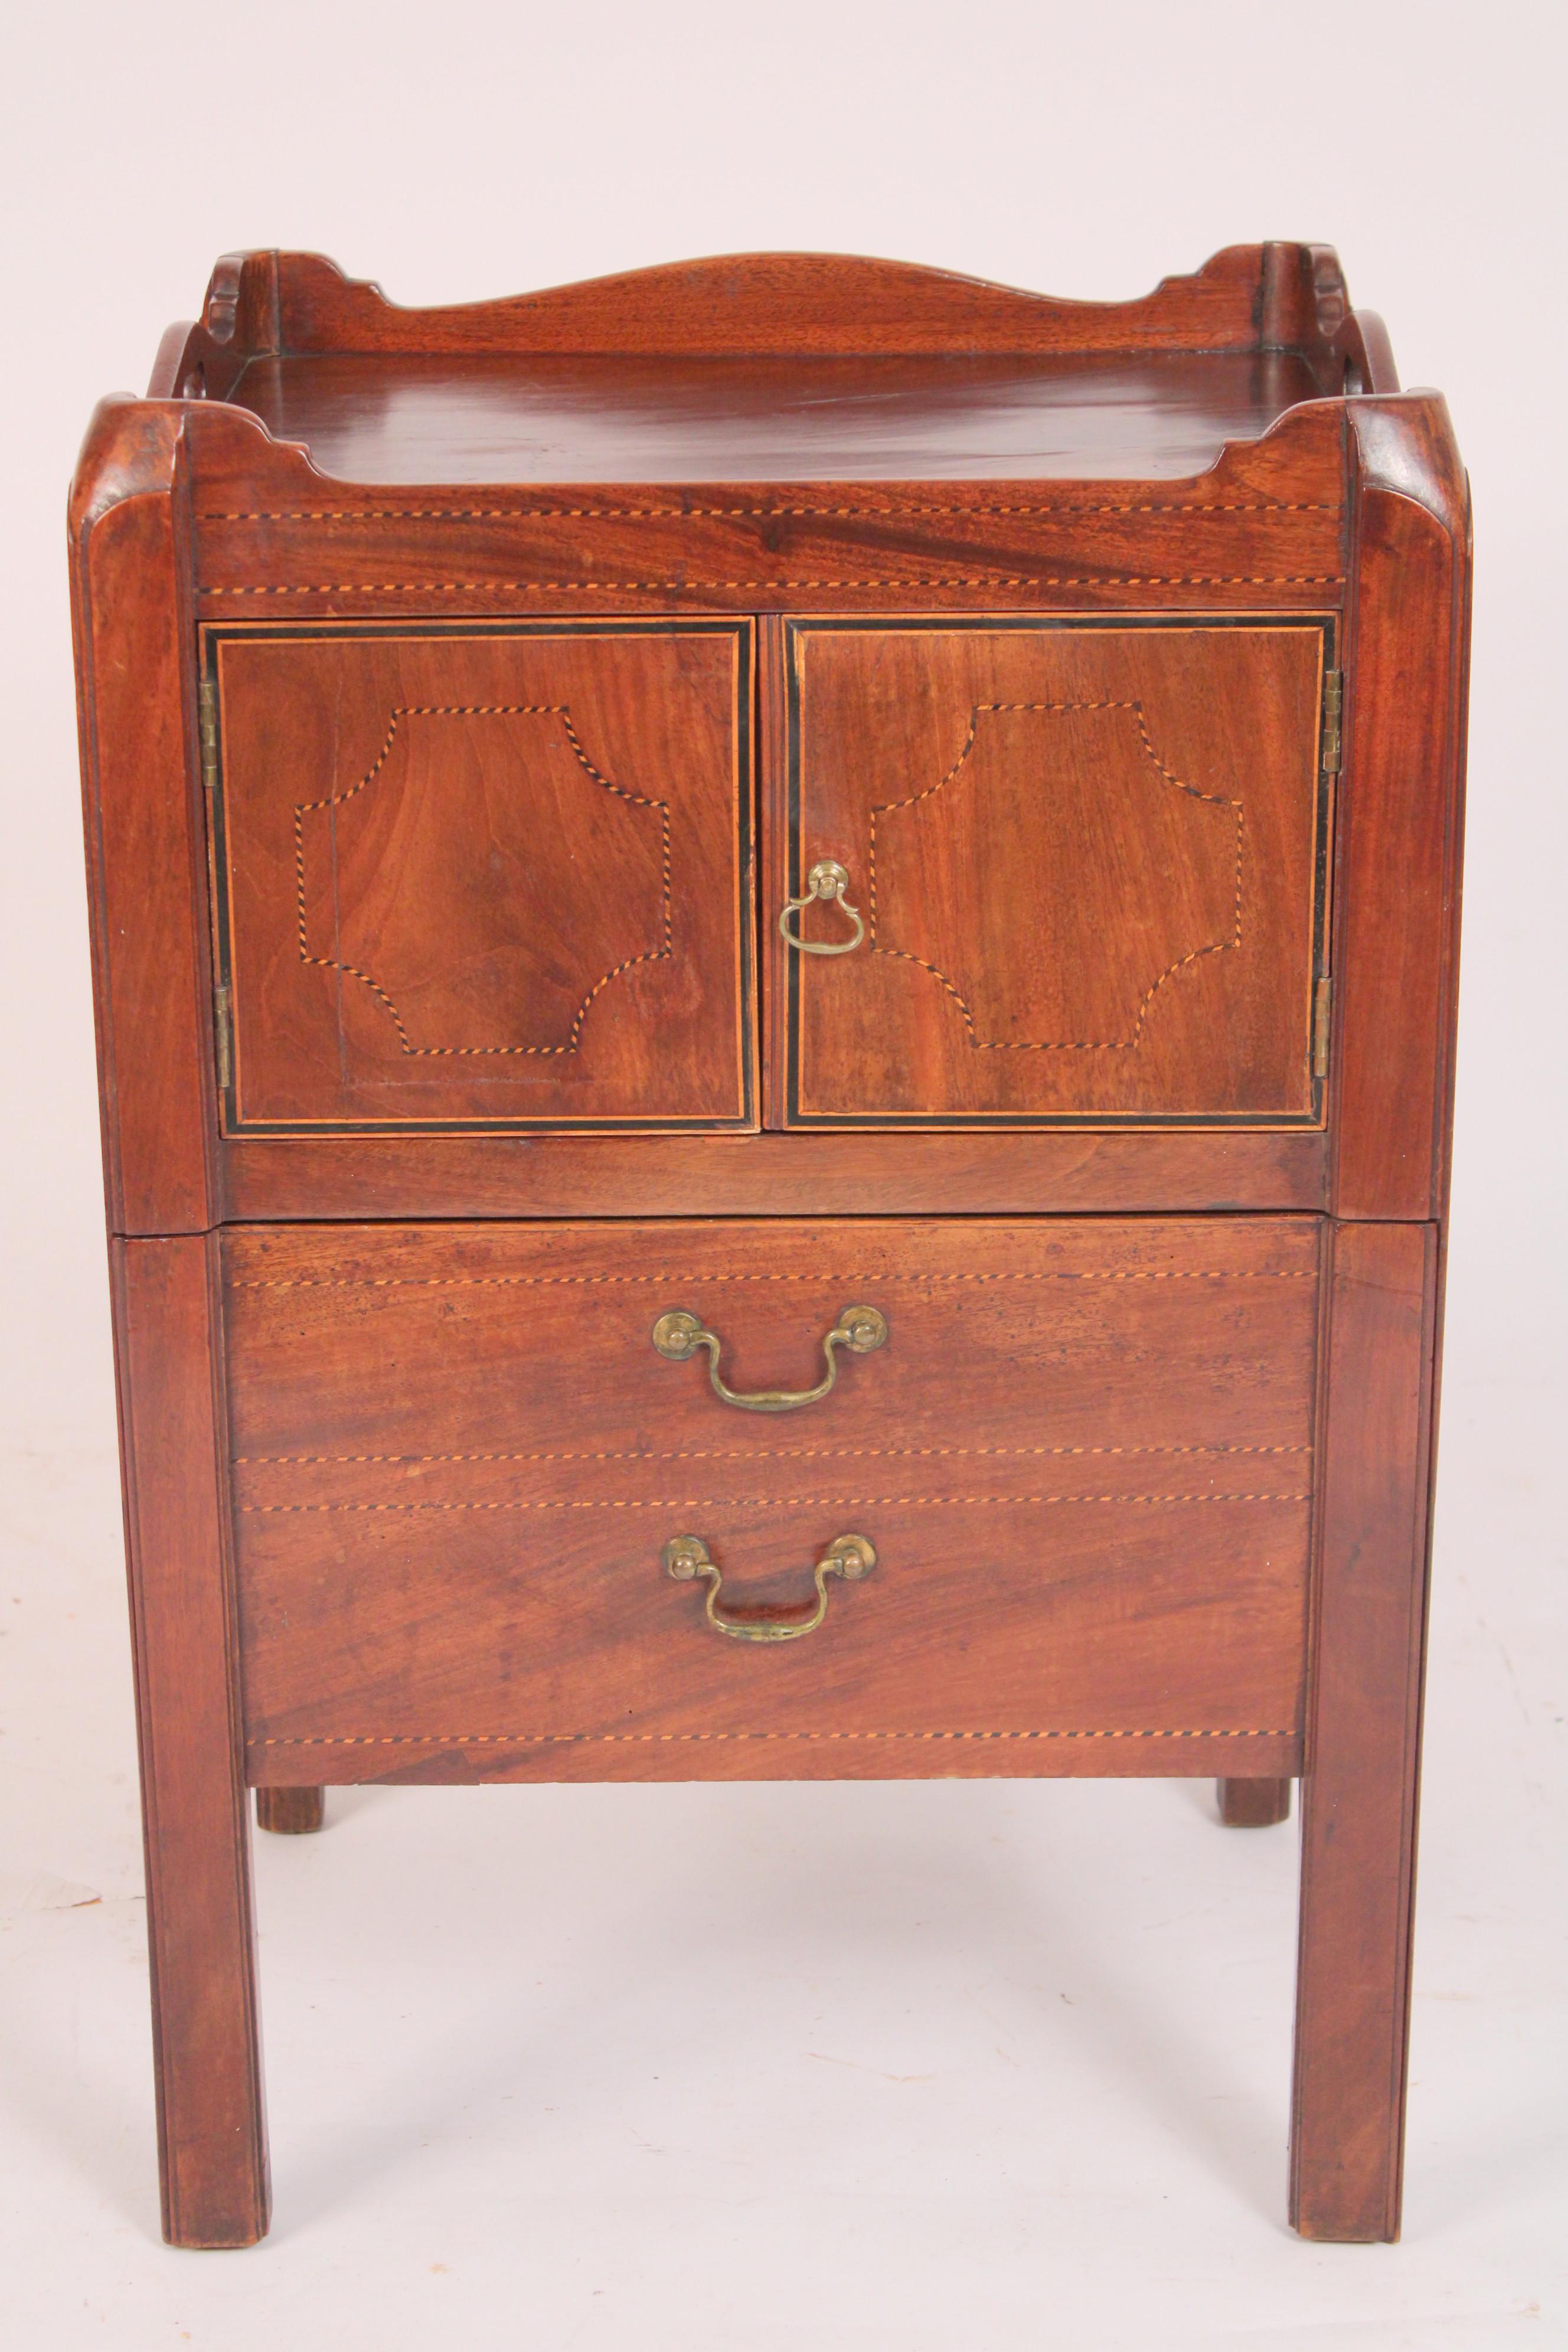 George III mahogany bedside table, circa 1800. With a square top with serpentine shaped side and back gallery, two drawers with string inlaid borders, bottom two false drawers pull out, see photos, resting on square legs.